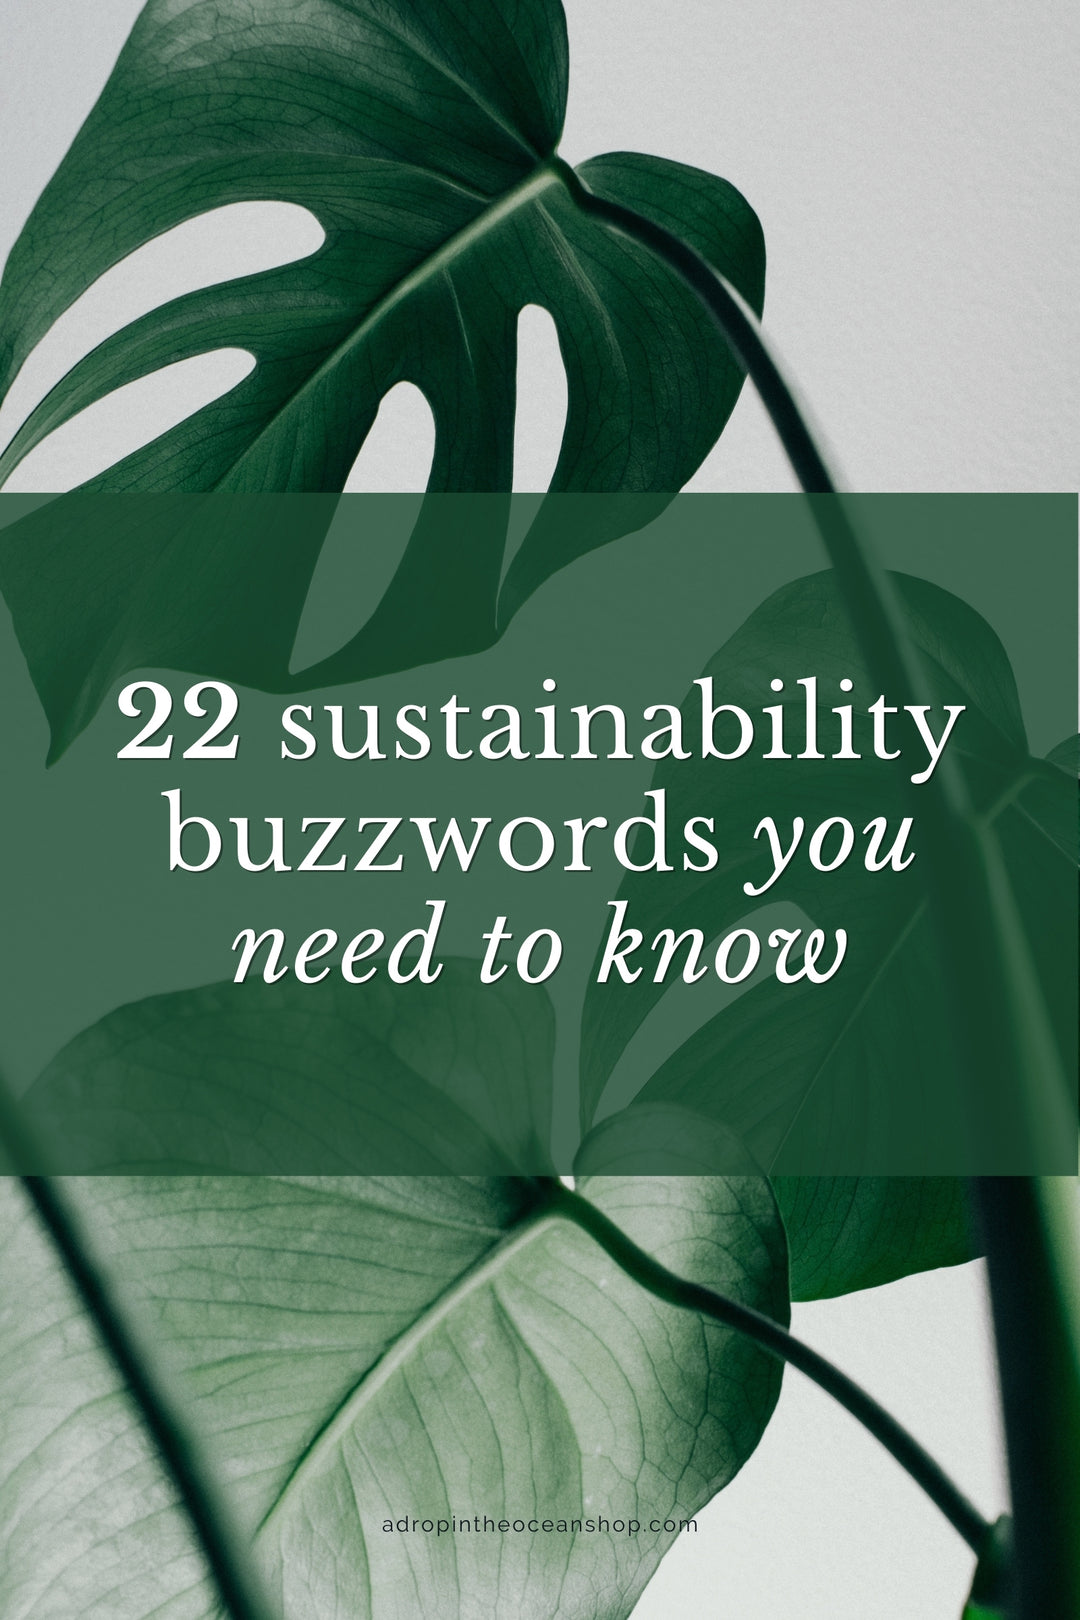 A Drop in the Ocean Zero Waste Blog: 22 Sustainability Buzzwords You Need to Know